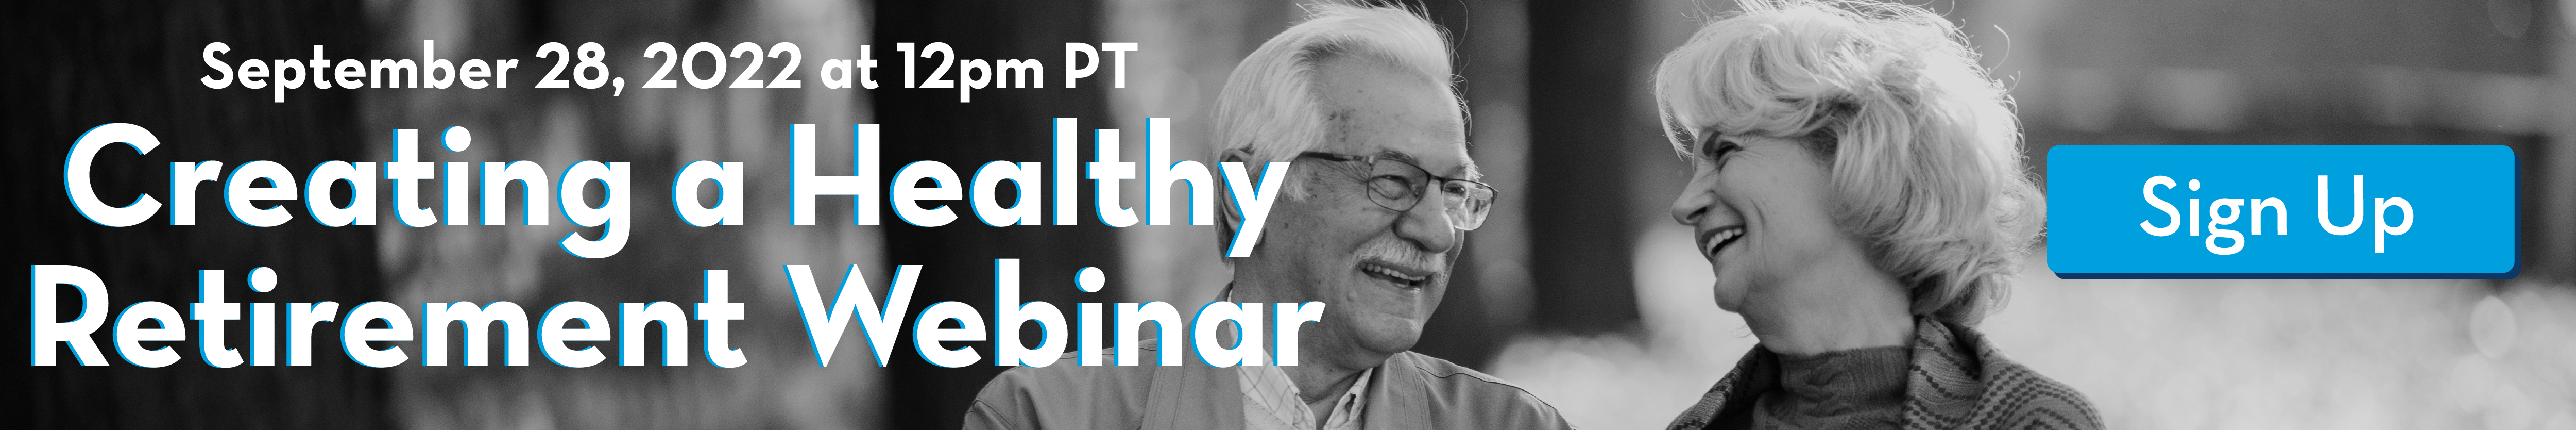 RSVP for the Creating a Healthy Retirement webinar!